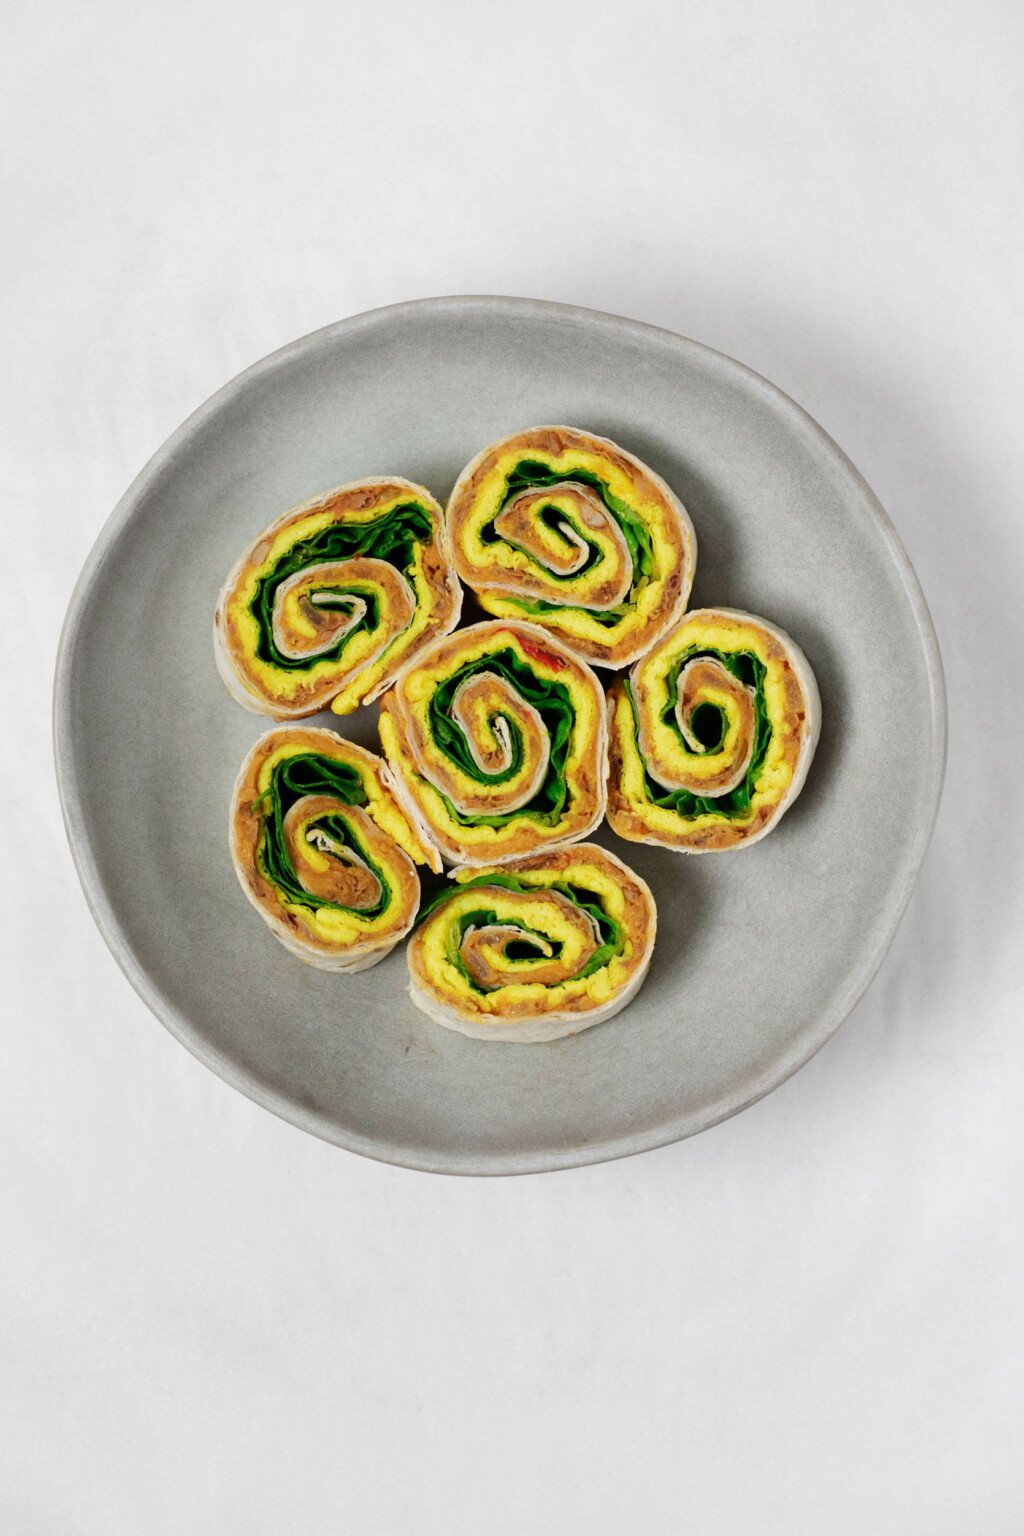 Vegan breakfast pinwheels, made with refried beans and layers of a yellow vegan egg mixture, have been cut and placed on a small, round plate.